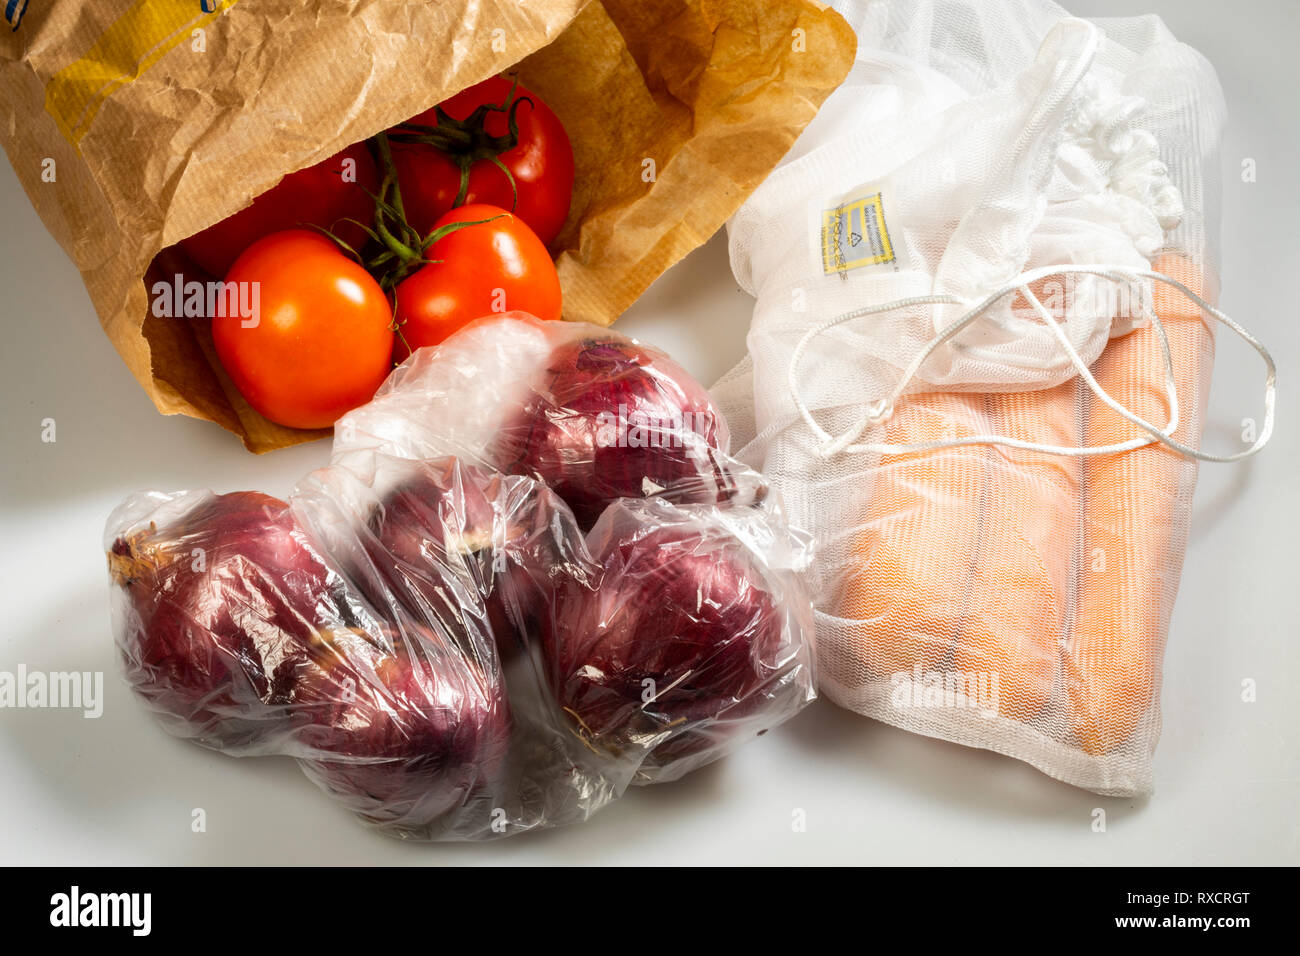 https://c8.alamy.com/comp/RXCRGT/food-packaging-carrots-in-a-reusable-plastic-net-avoiding-plastic-garbage-onions-in-a-disposable-plastic-bag-tomatoes-in-a-paper-bag-RXCRGT.jpg